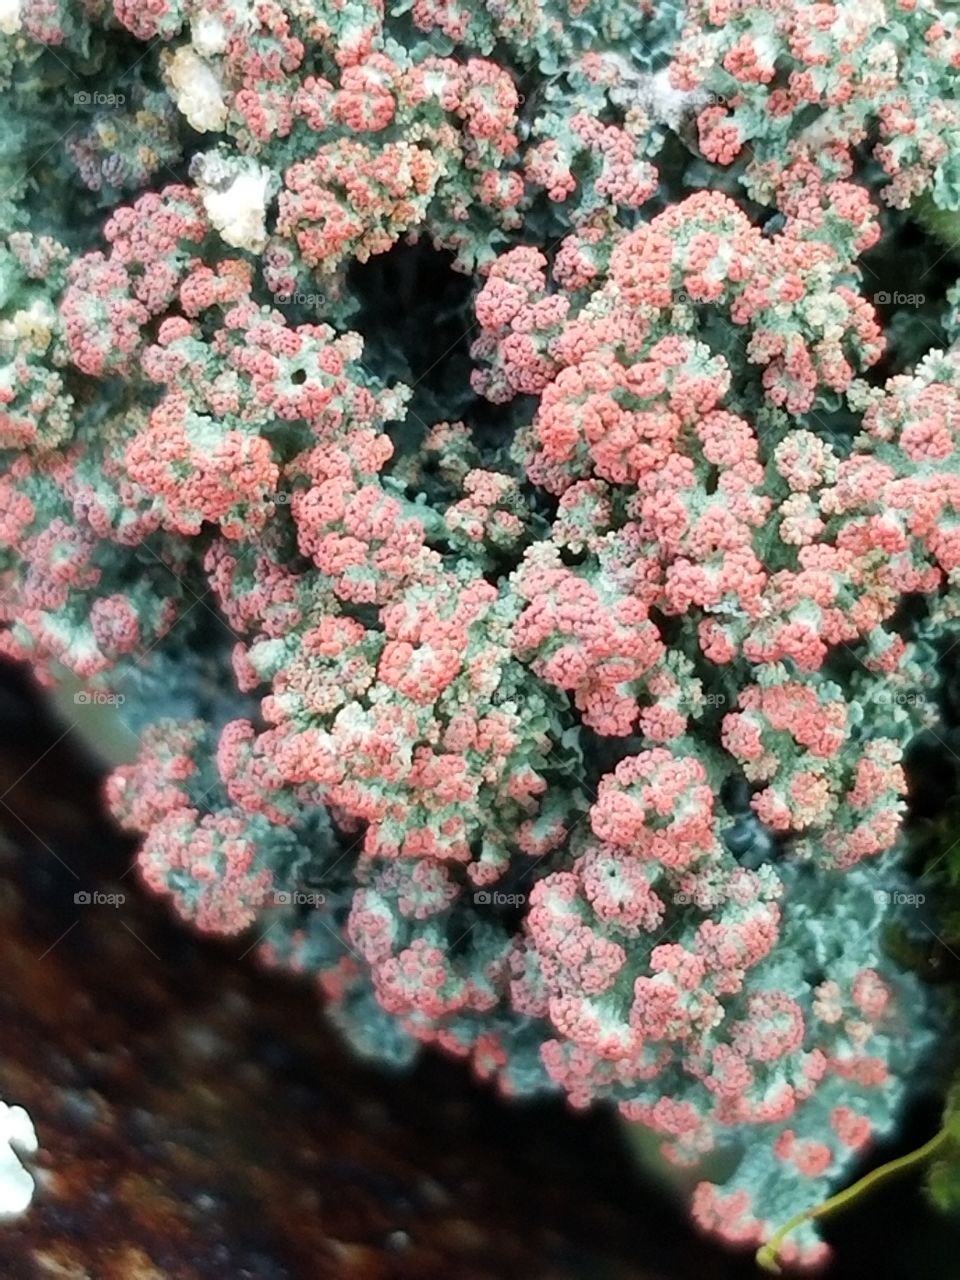 Orange and Green colored lichen growing in the spring